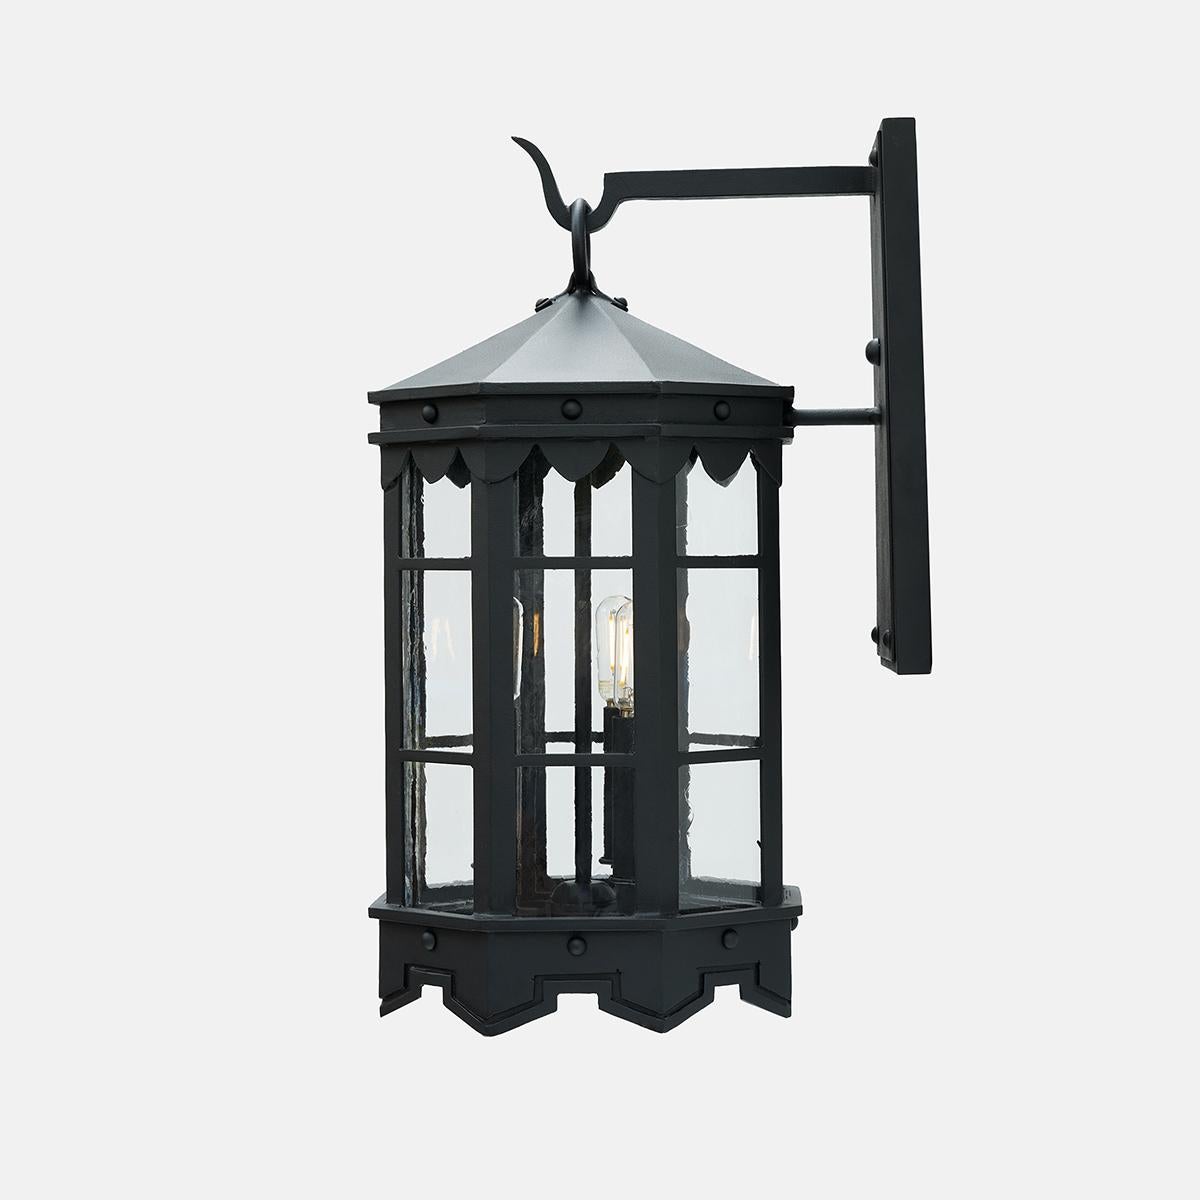 Our De La Guerra lantern finished in our premium dark zinc finish has Mediterranean style precedence with historic profiles and contemporized geometric lines. A striking fixture during the day but even more so at night when the patterned hem casts